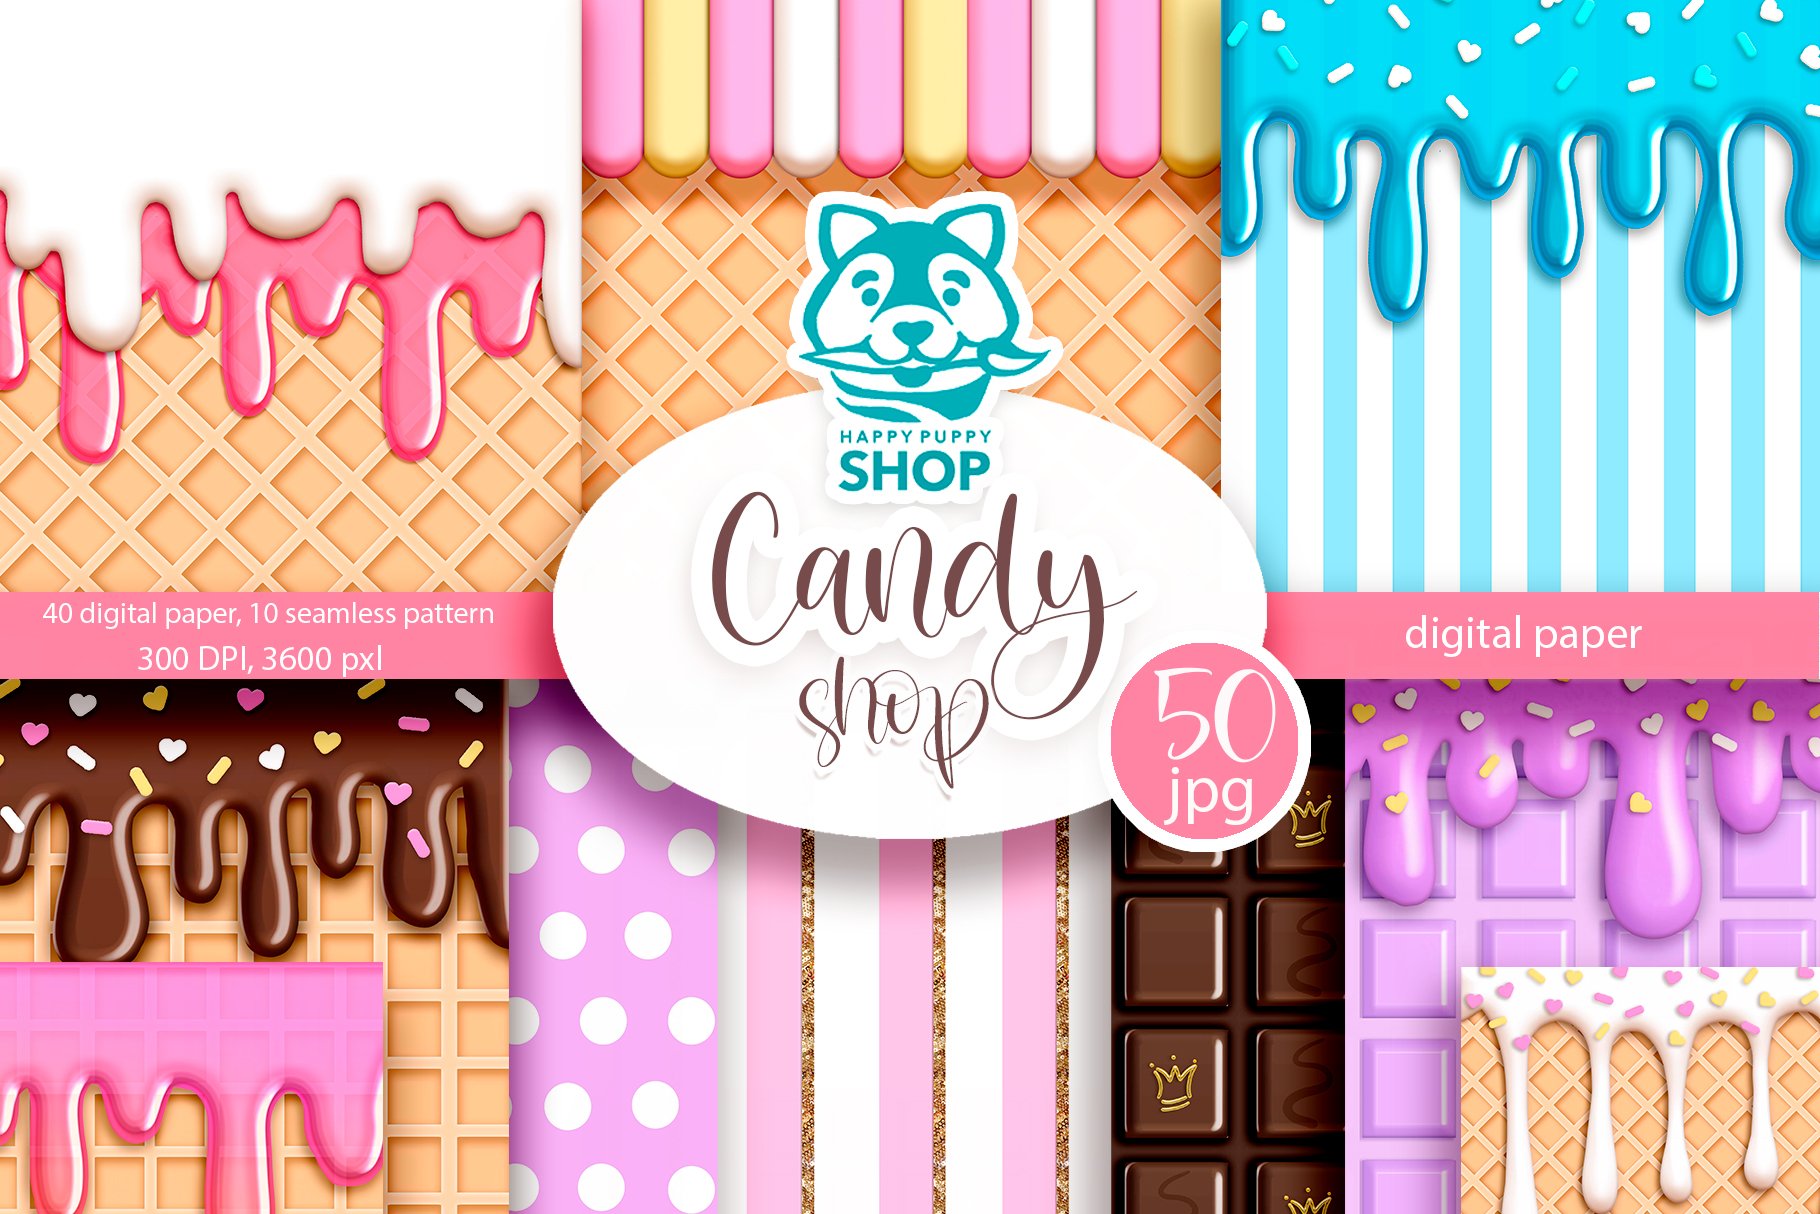 Candy shop digital paper cover image.